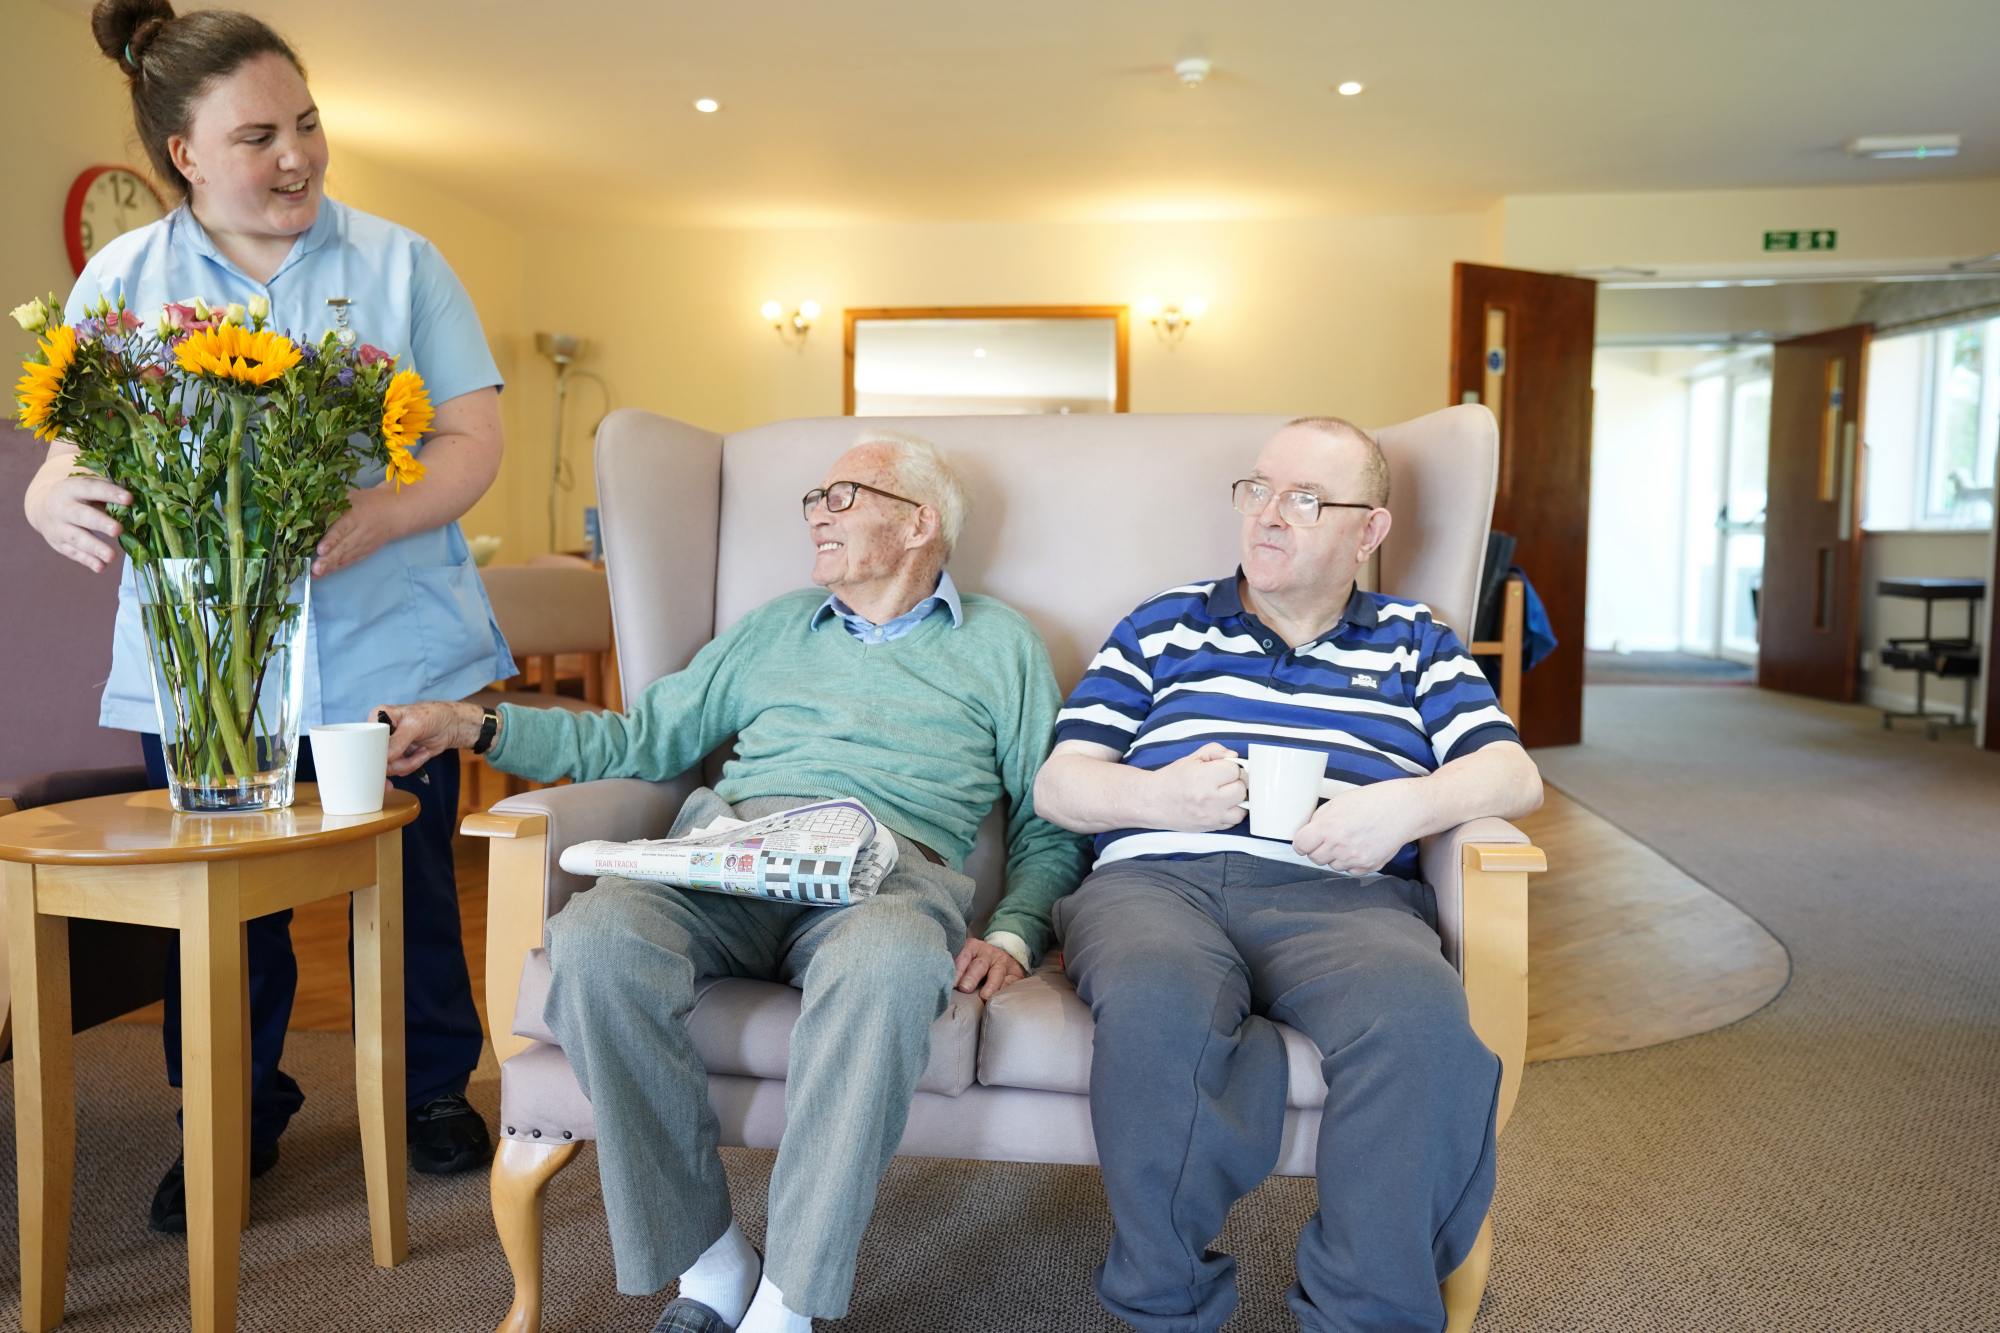 East Sussex Care Home | Residents enjoying a cup of tea in a cosy setting